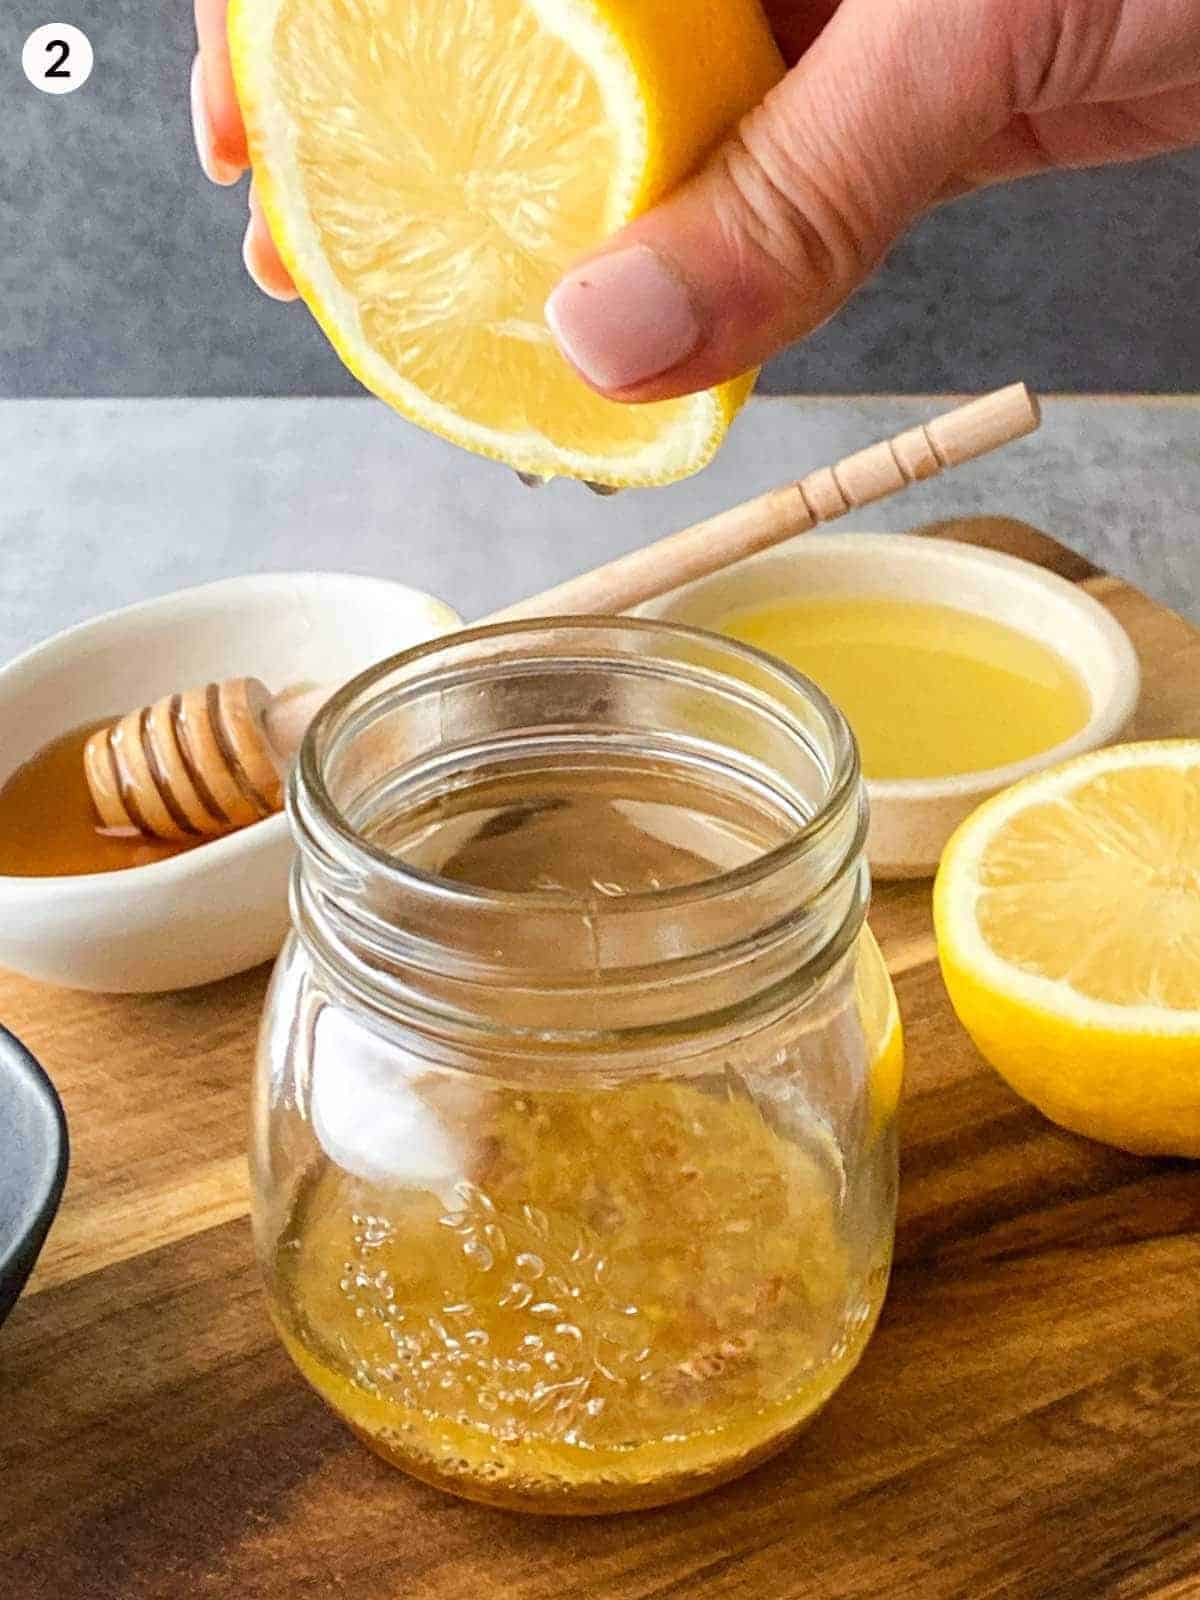 Squeezing half a lemon into a jar of olive oil and seeded mustard with honey and lemon in the background